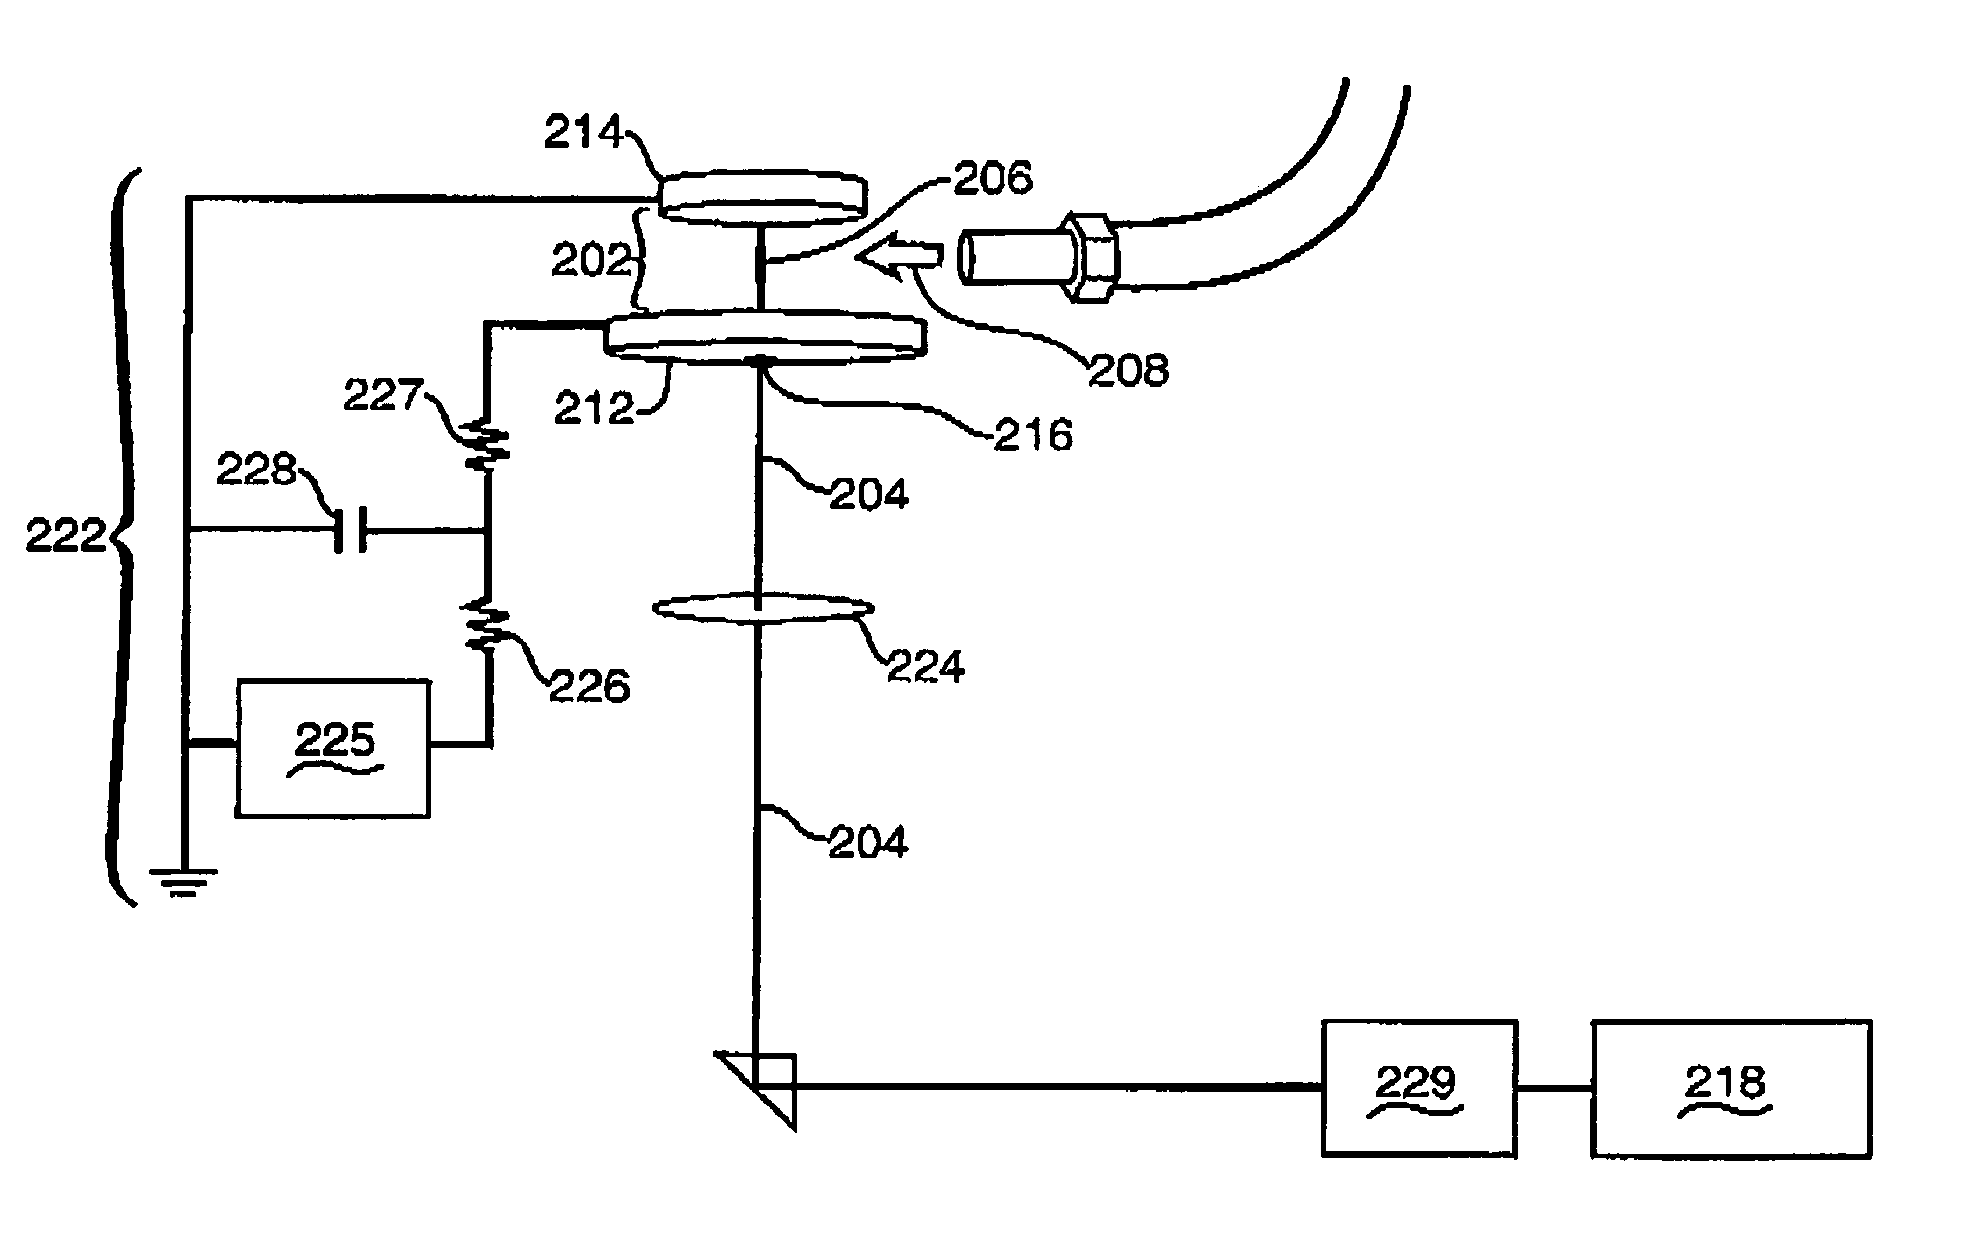 Low energy laser-induced ignition of an air-fuel mixture